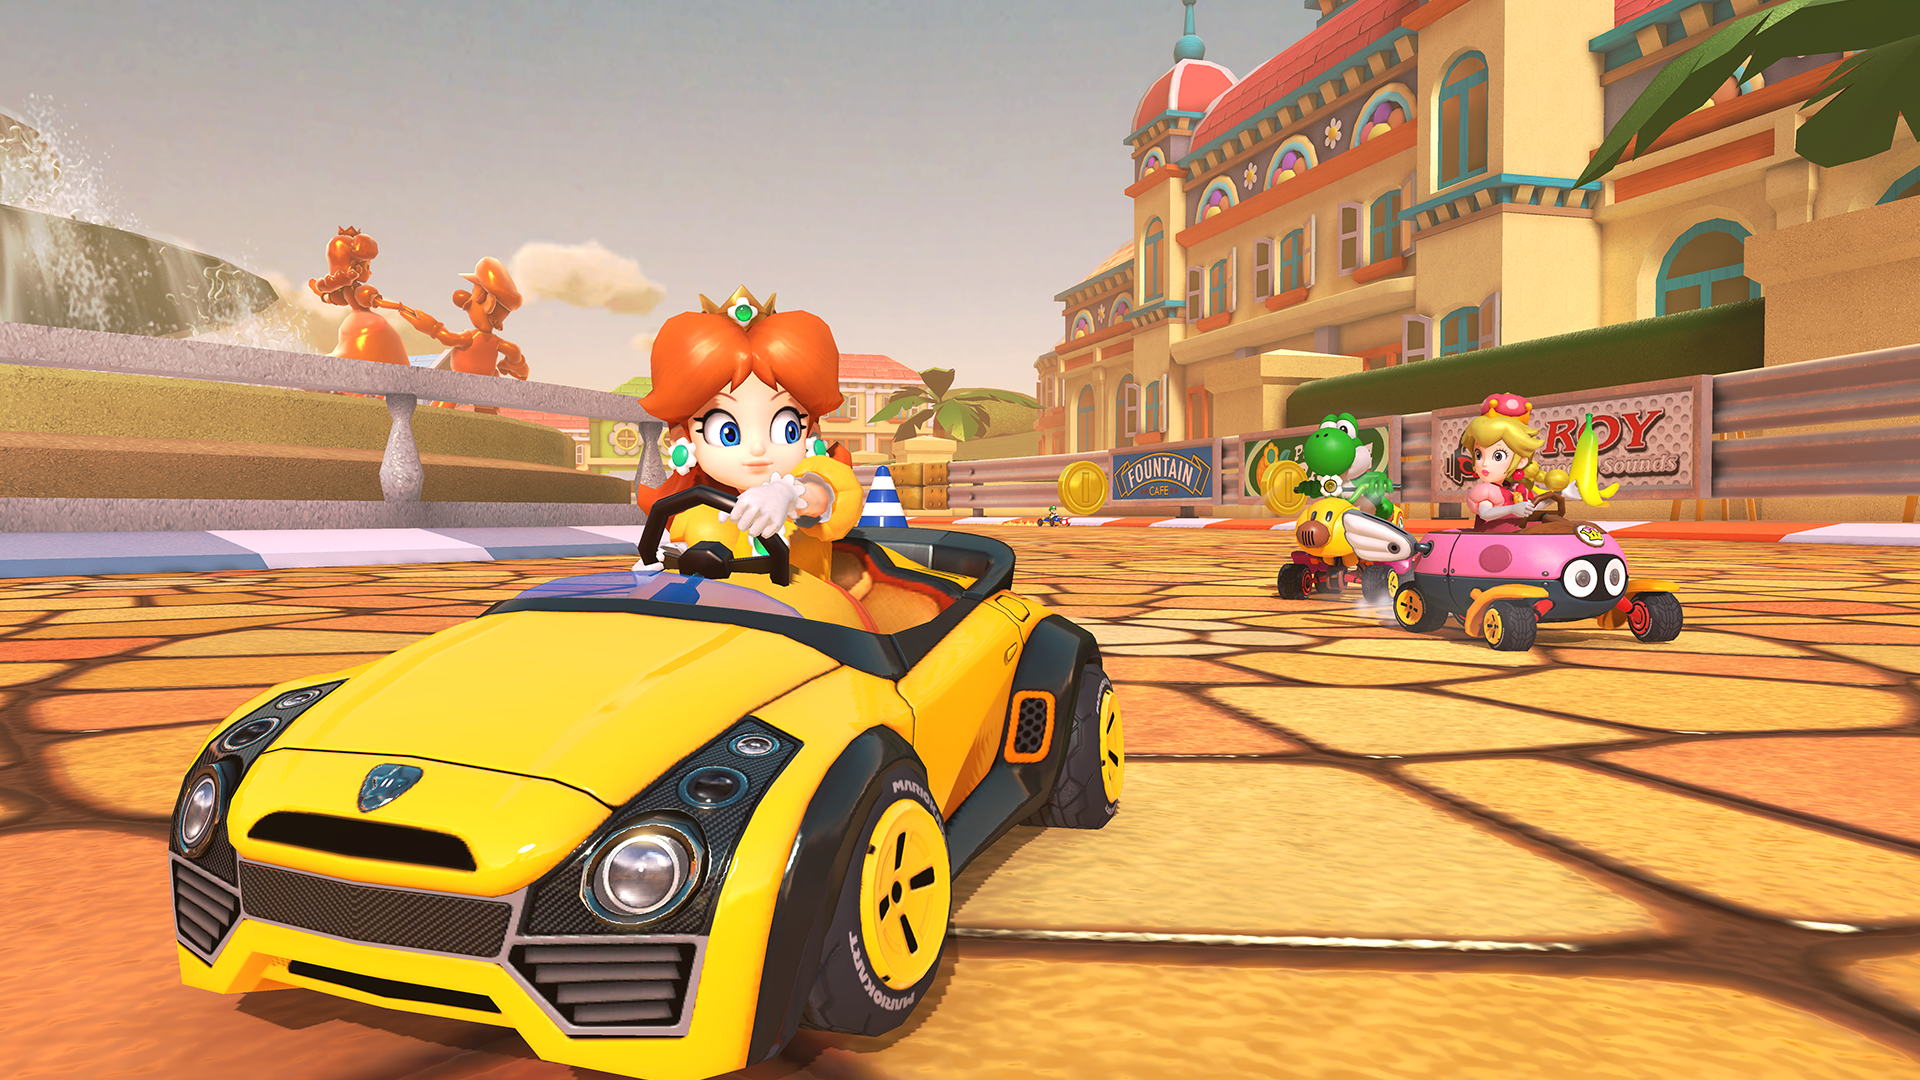 https://mario.wiki.gallery/images/2/29/MK8D_DaisyCircuit_View_16.png?download